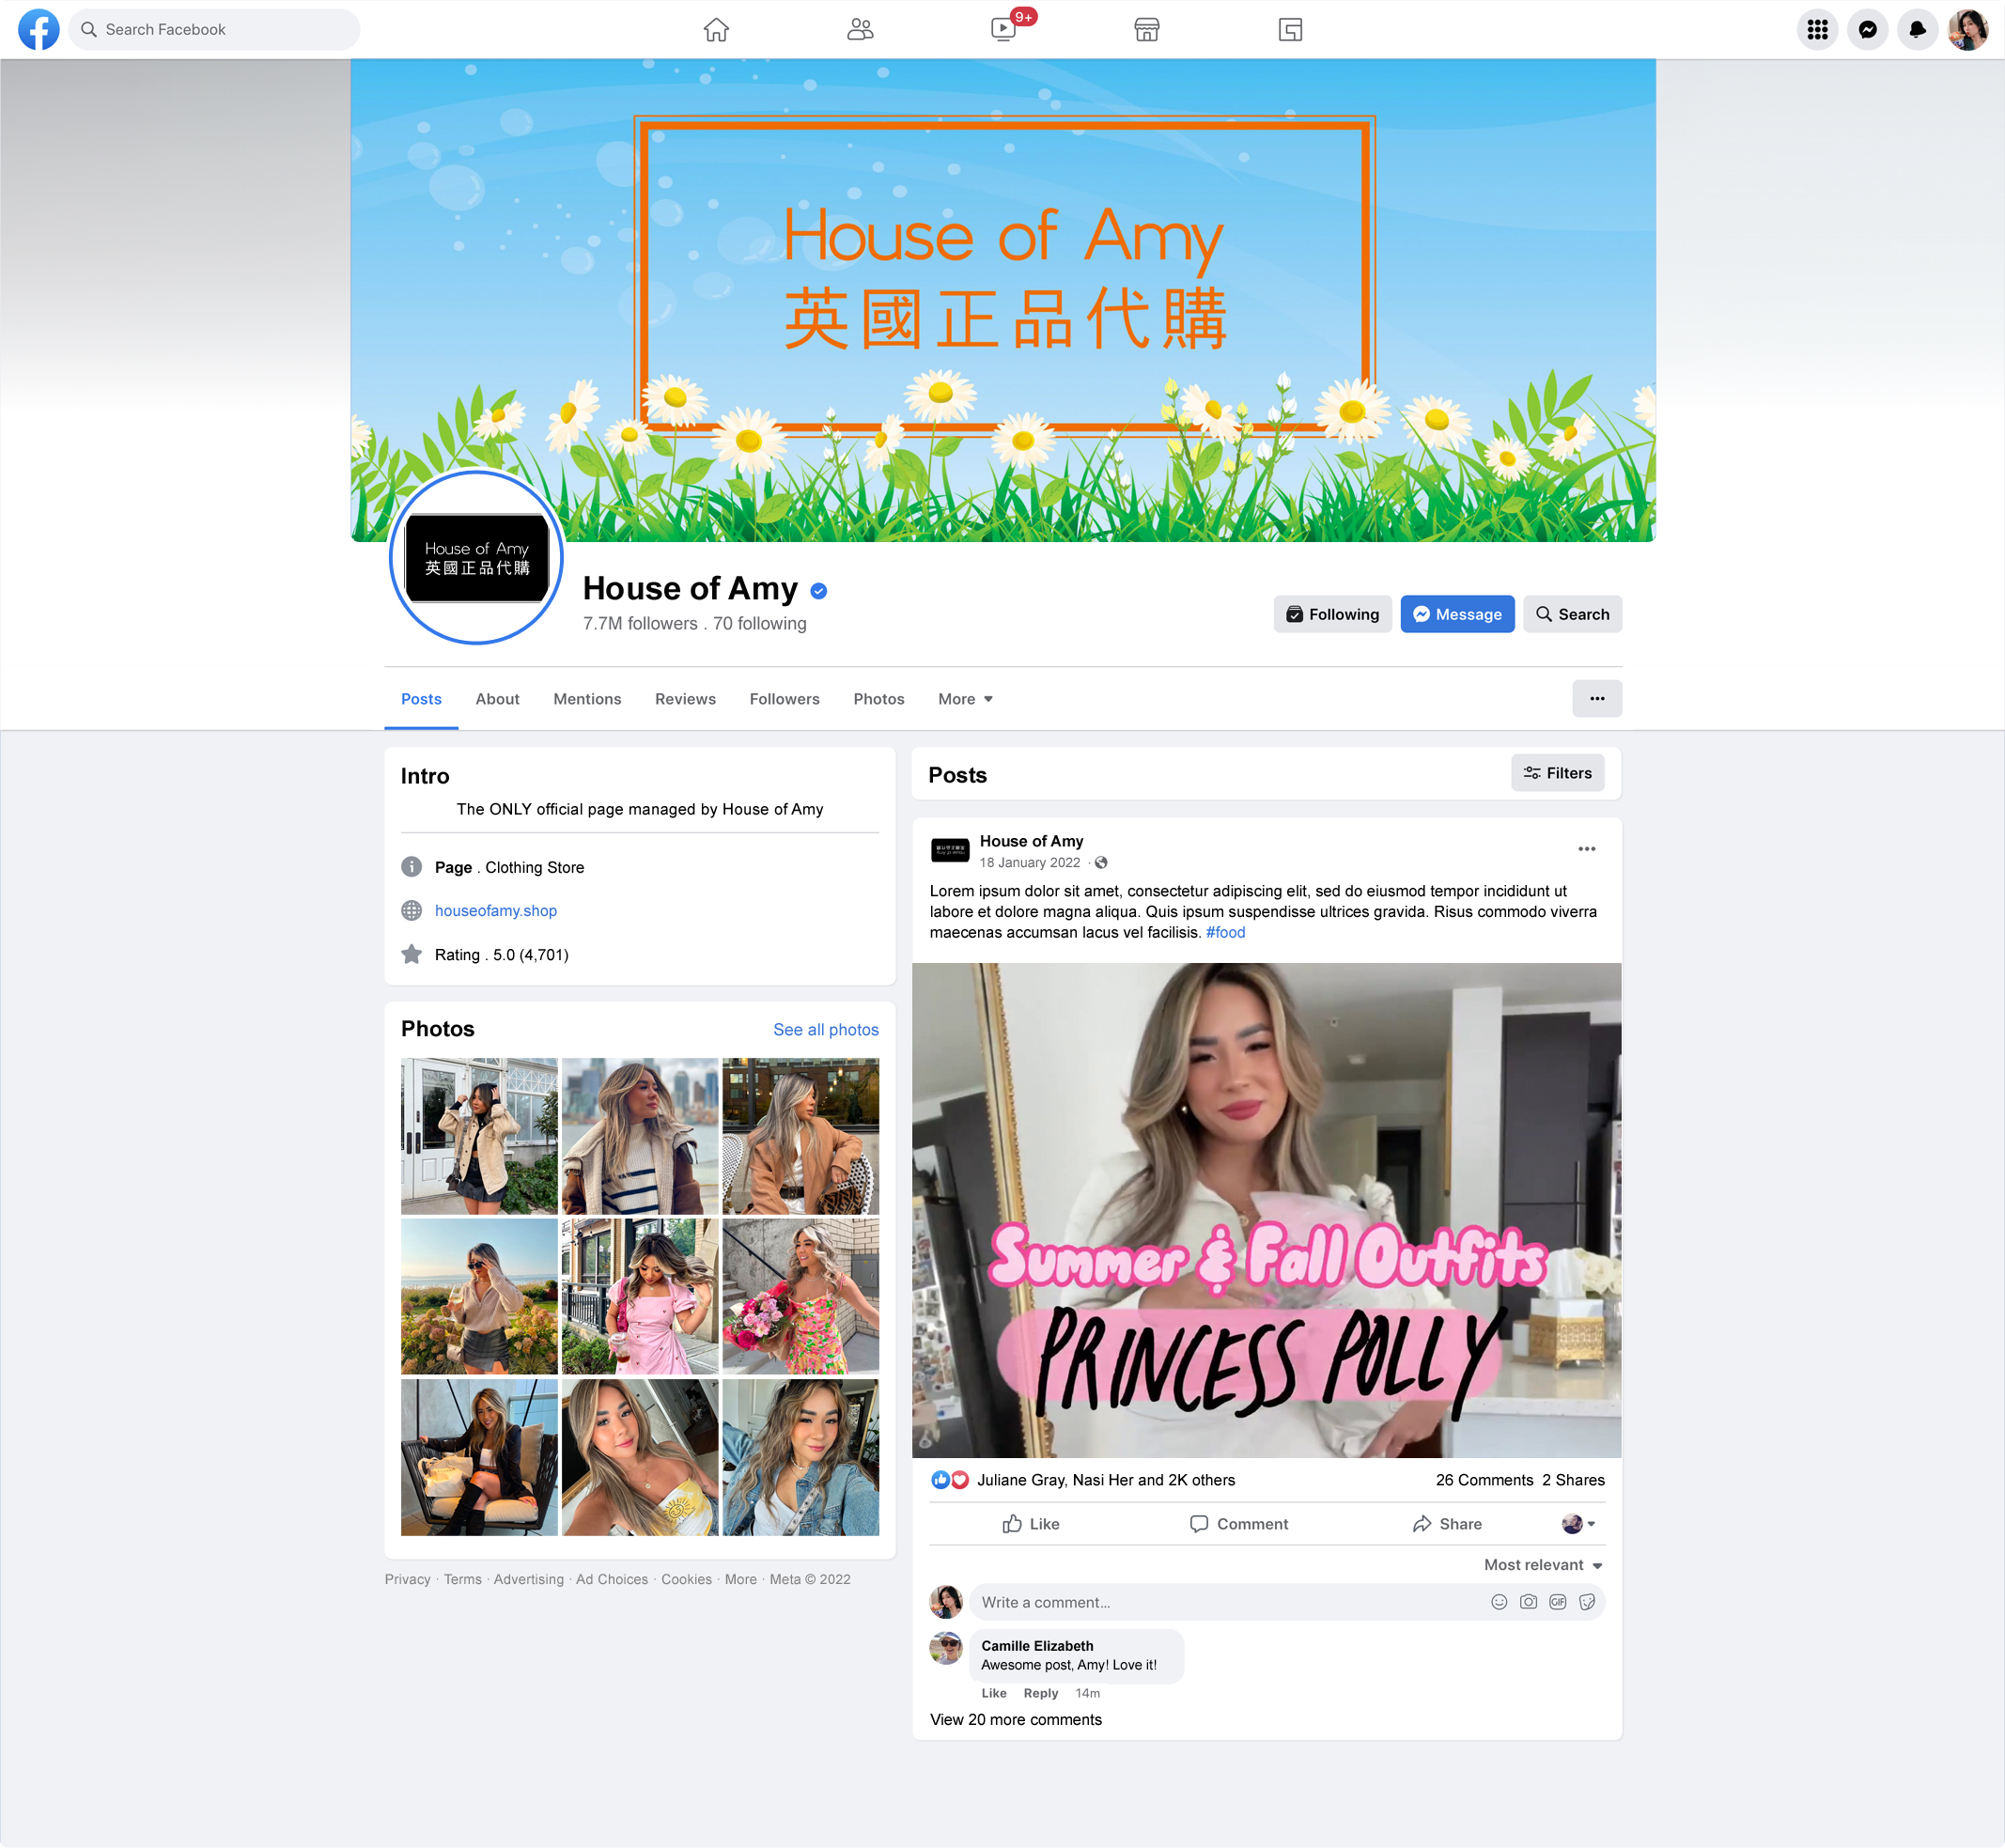 Mockup of the Facebook page for House of Amy (Content copyright to Amy Ngyuen, Instagram)